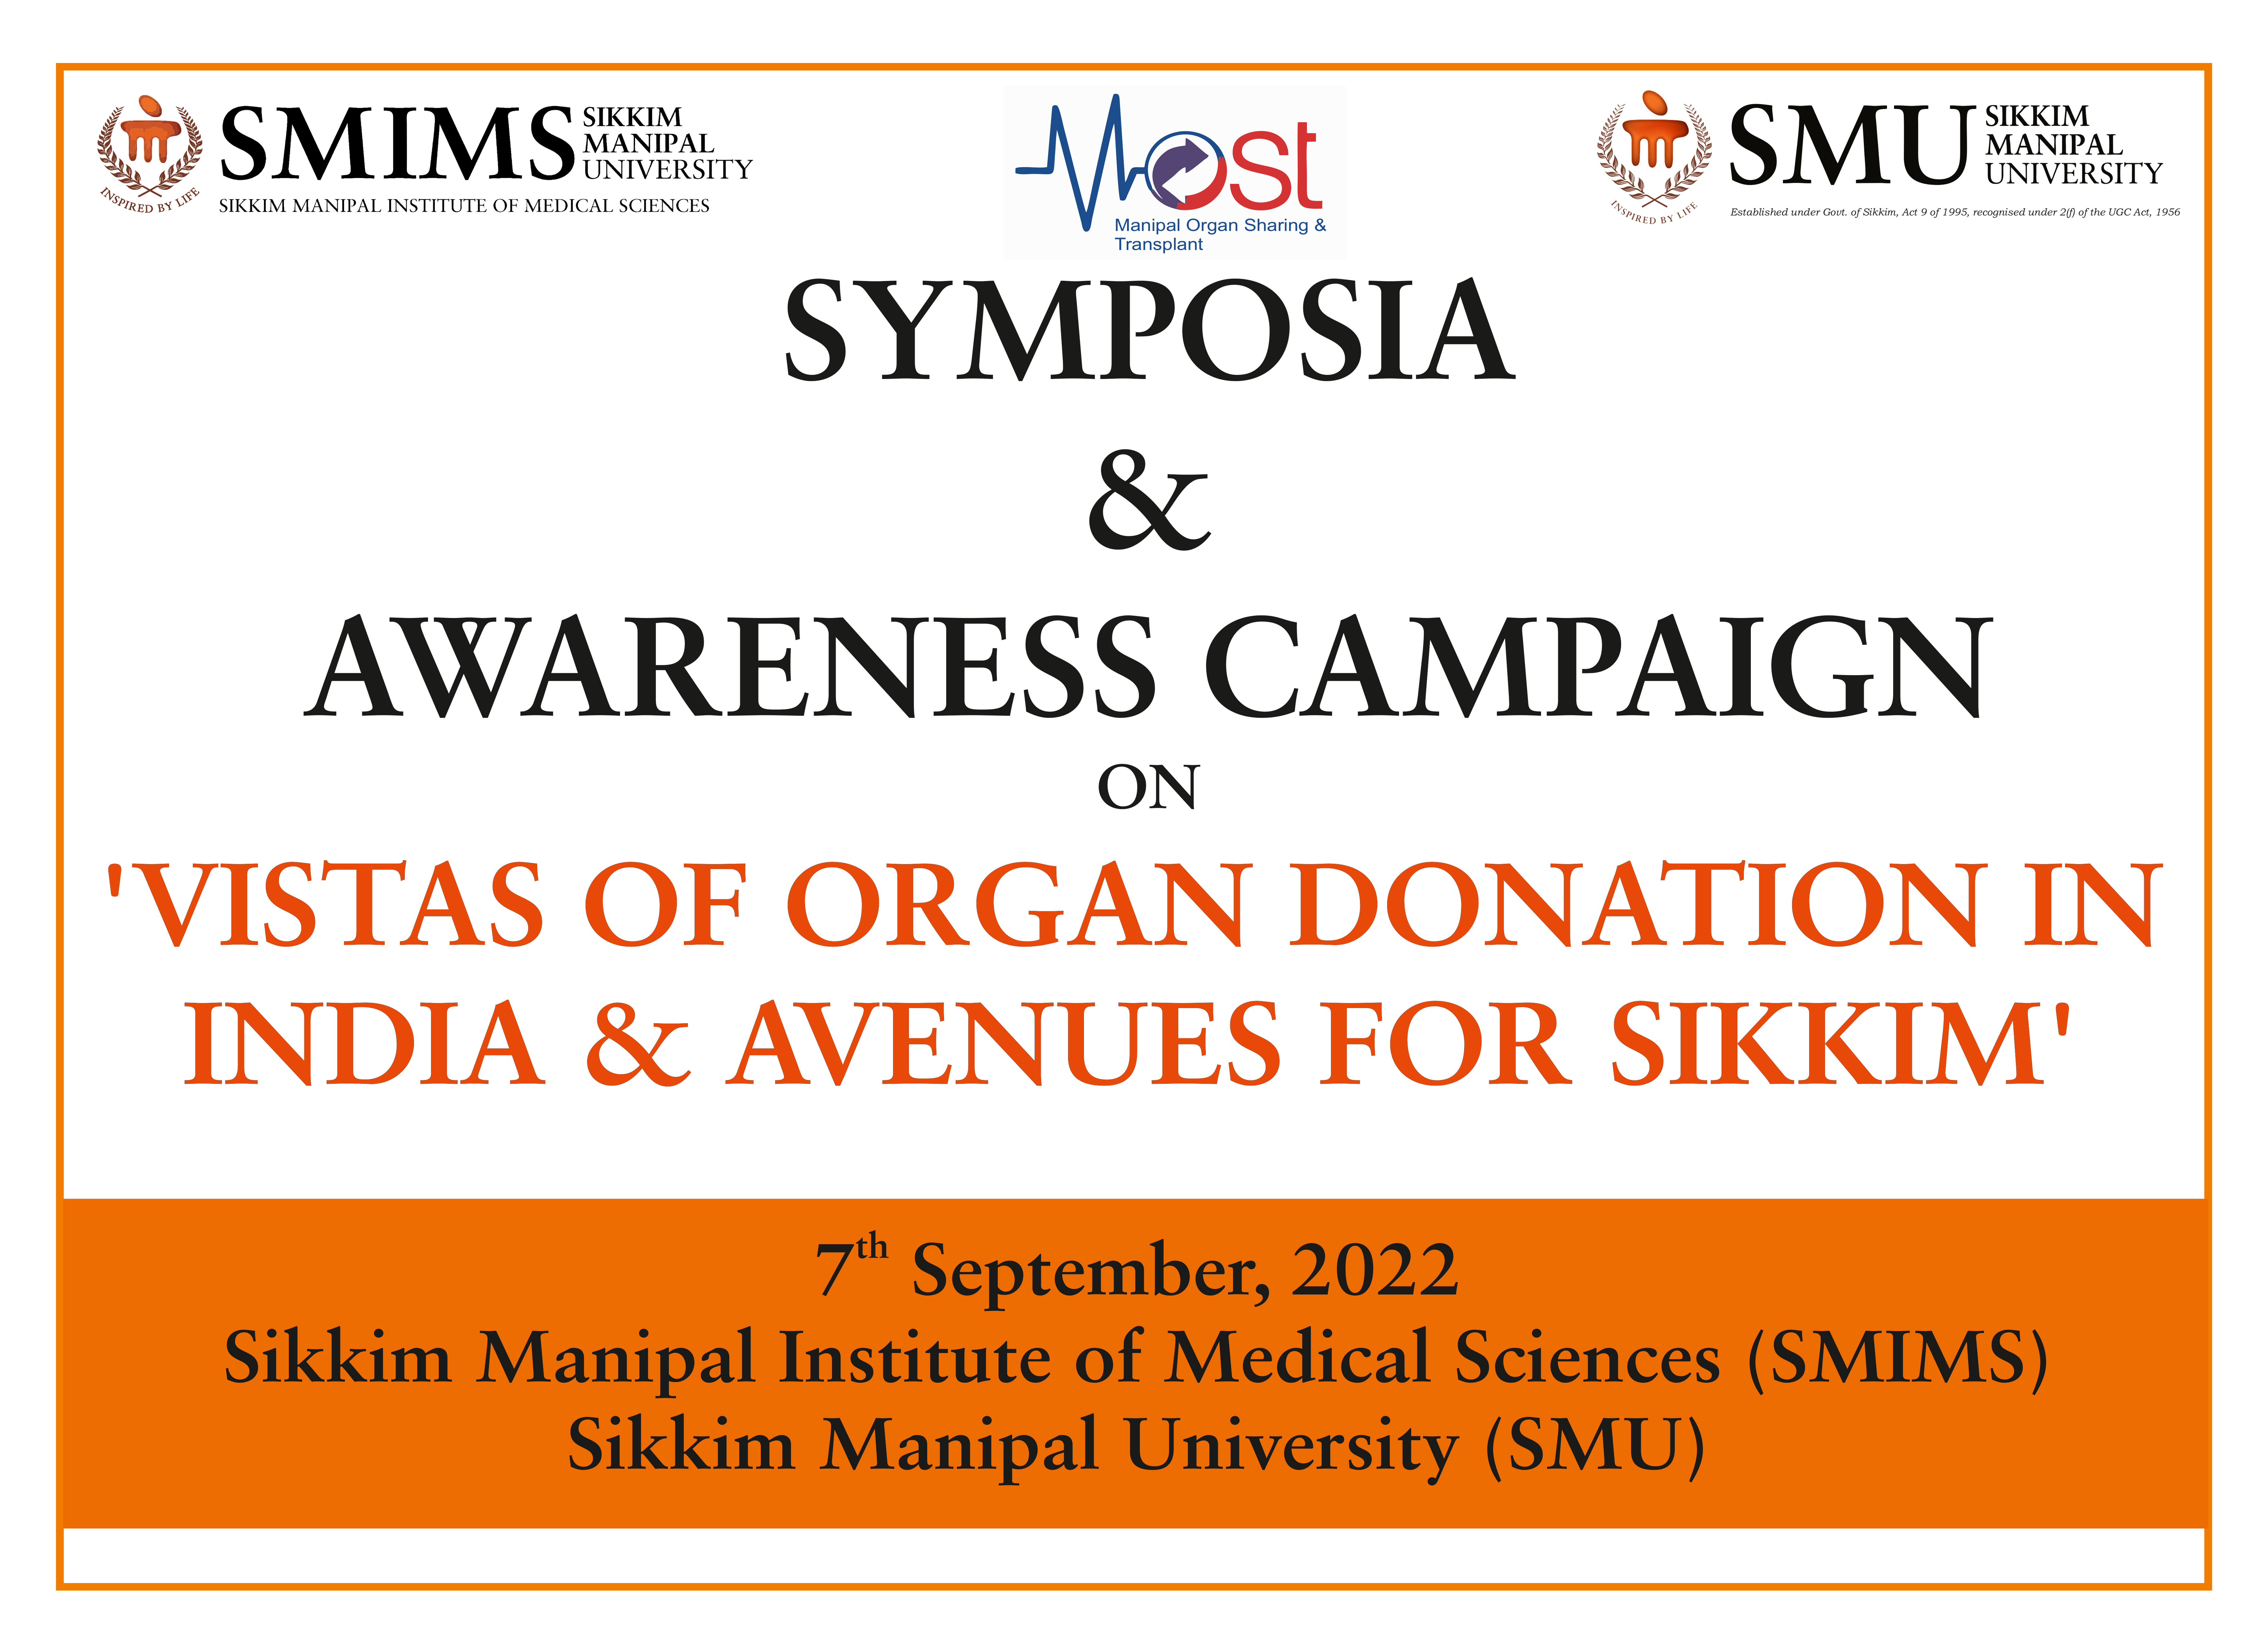 VISTAS OF ORGAN DONATION IN INDIA & AVENUES FOR SIKKIM | 07-09-2022